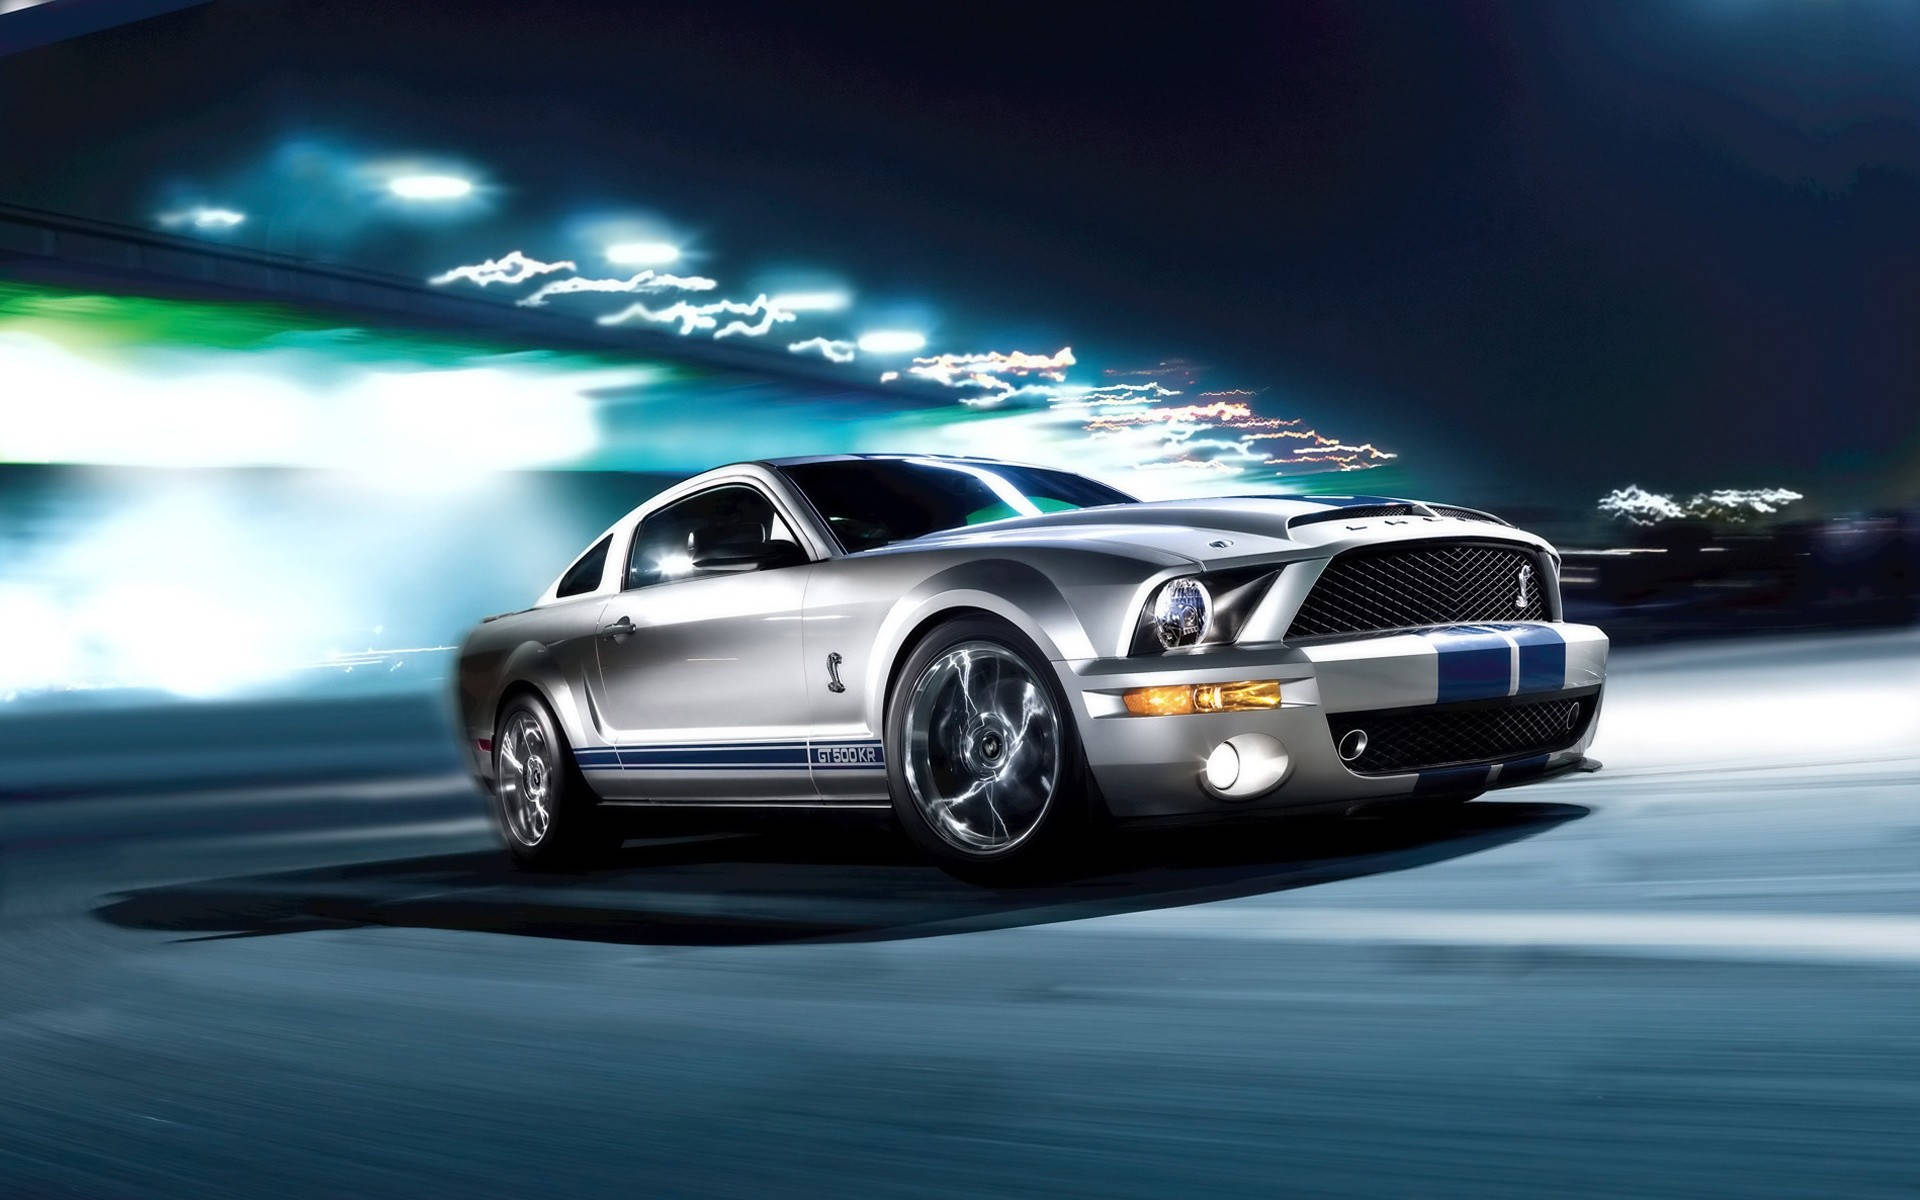 2009 Silver Shelby Mustang Hd Background